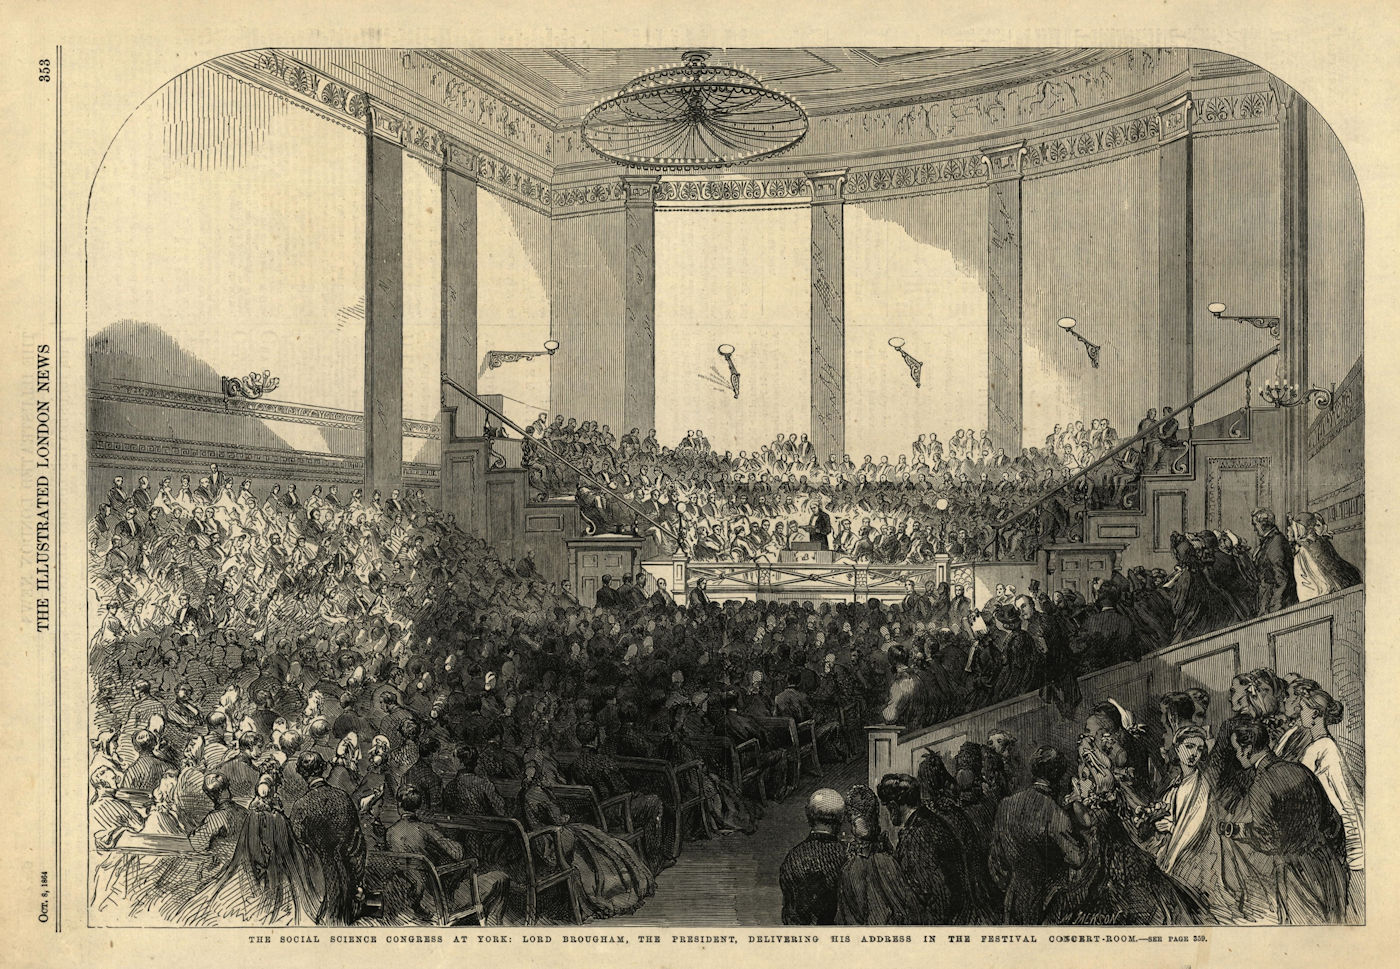 Lord Brougham addressing the Social Science Congress, concert-room, York 1864